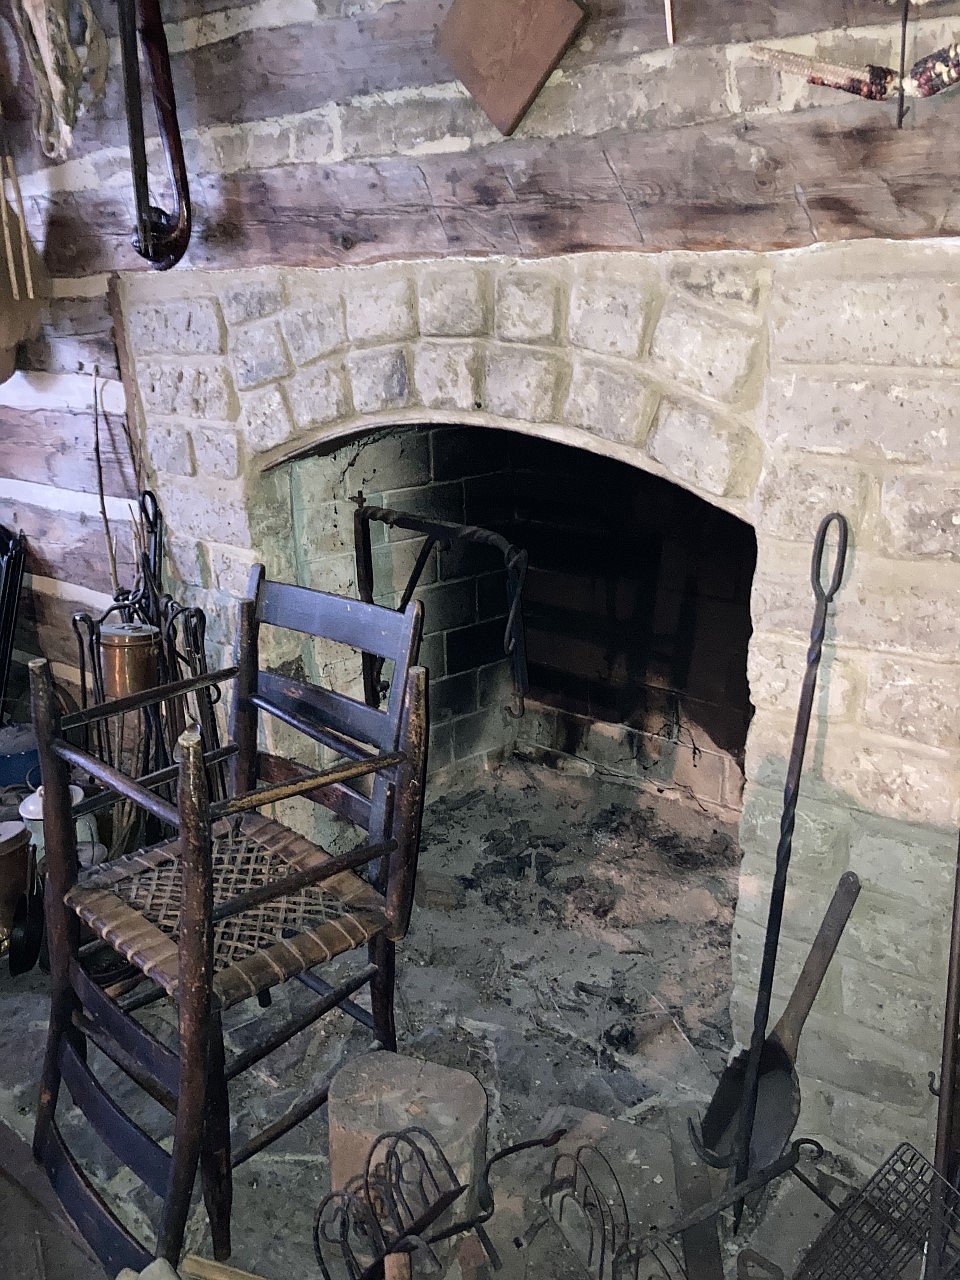 The Jocko Agency fireplace was rebuilt, stone by stone, when the building was moved to the trading post site. (Four Winds Trading Post)